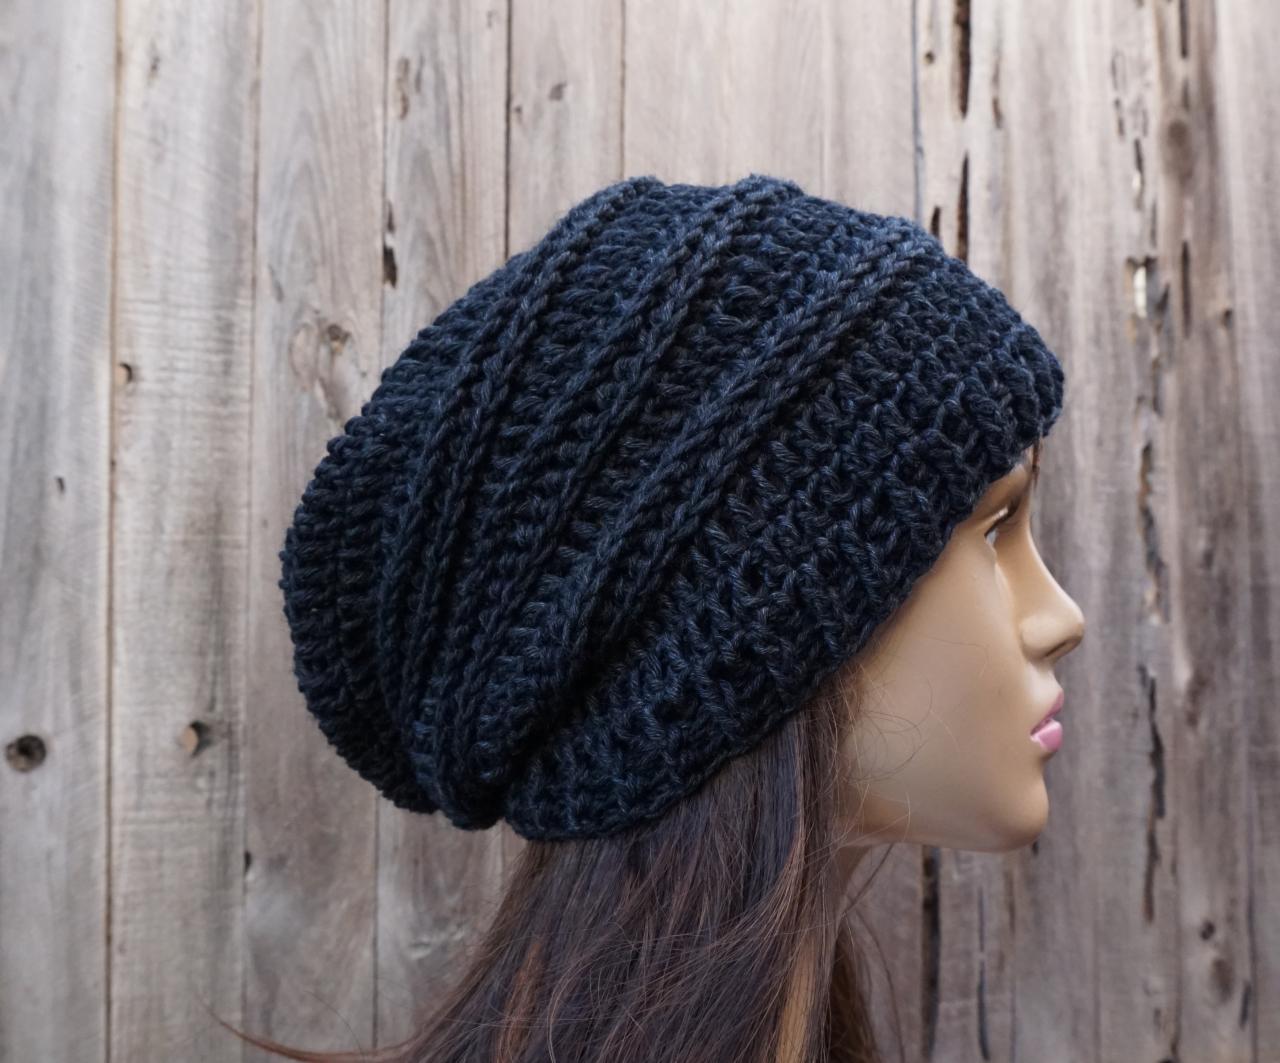 Crochet Hat - Slouchy Hat -black- Winter Accessories Autumn Accessories Fall Fashion